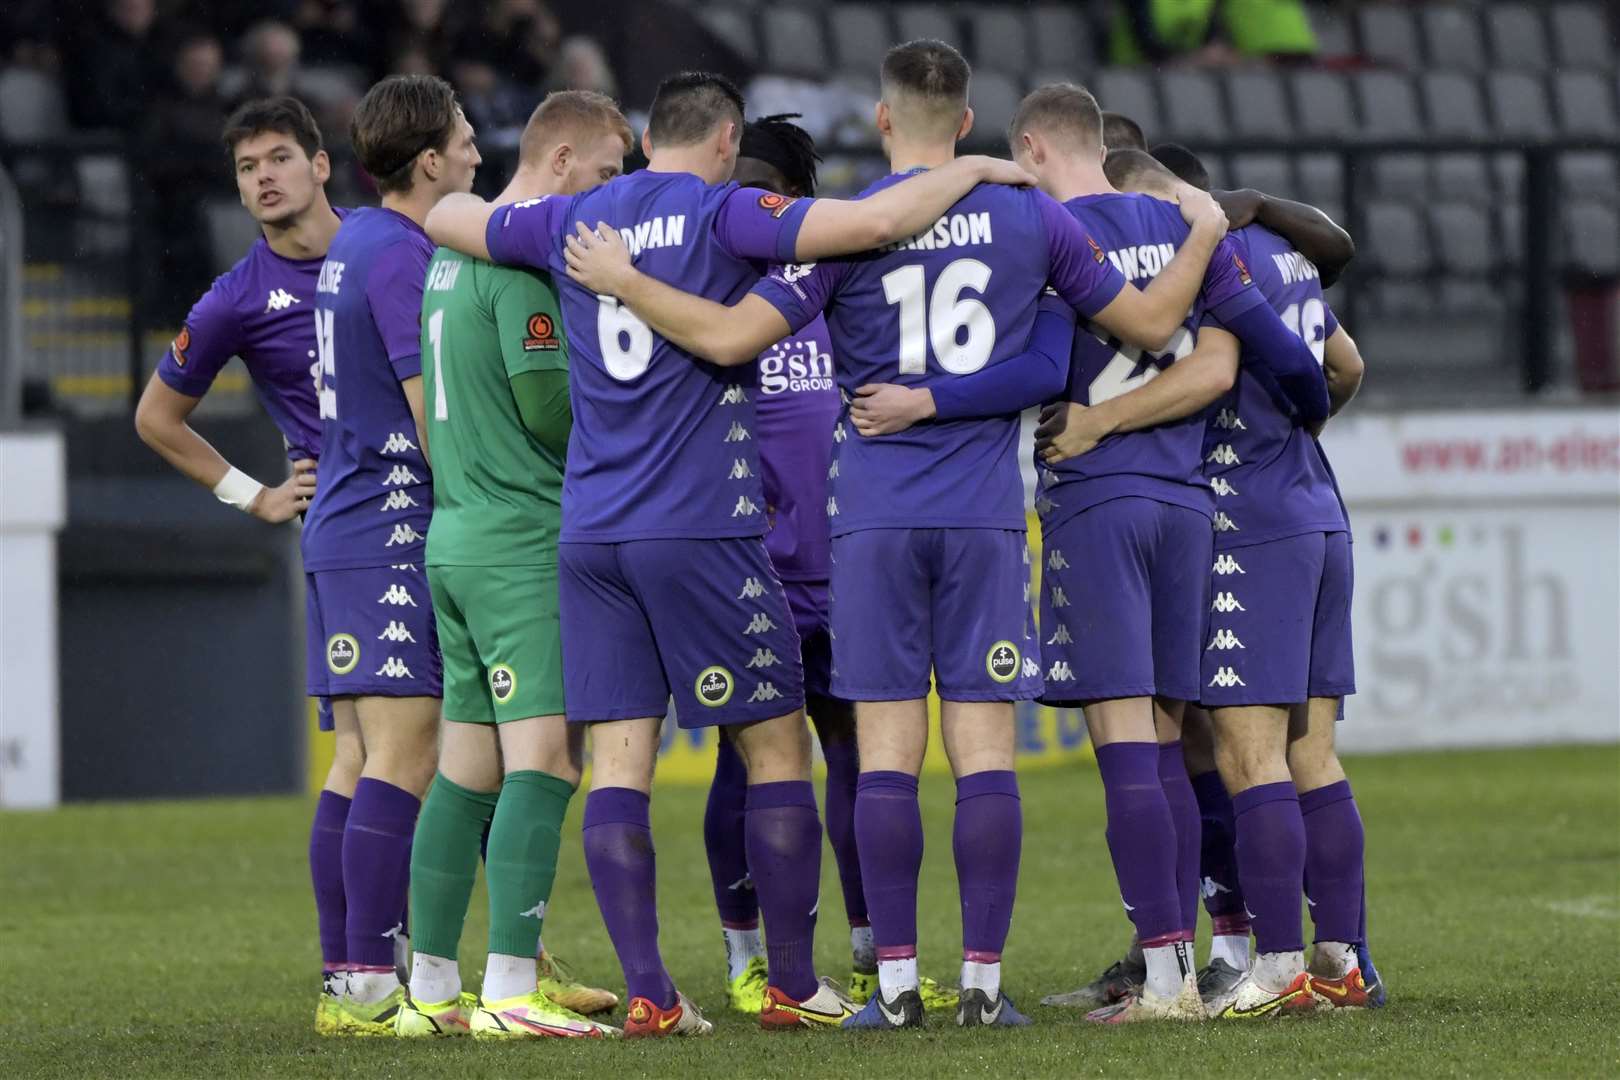 Pre-match huddle for the home side in their change kit of all purple. Picture: Barry Goodwin (53955766)